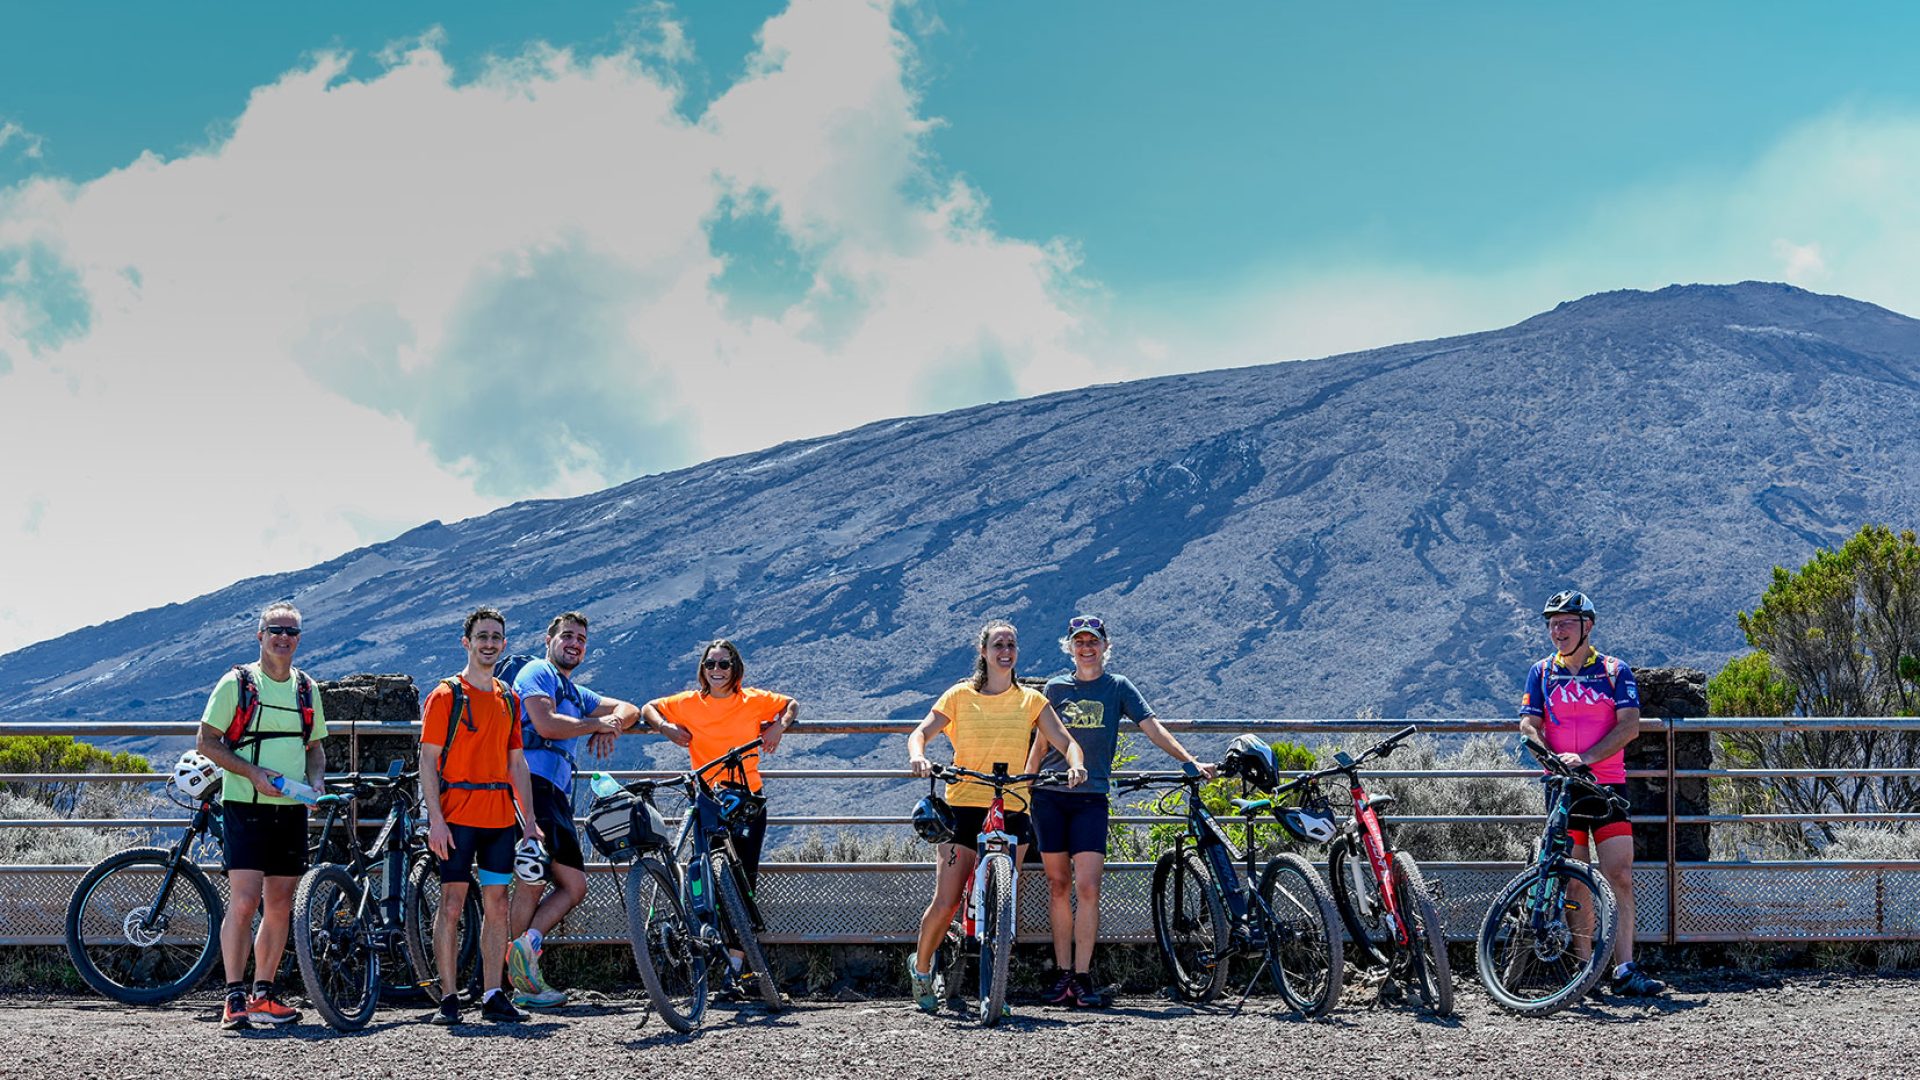 Hikers cycling in front of the Piton de la Fournaise volcano